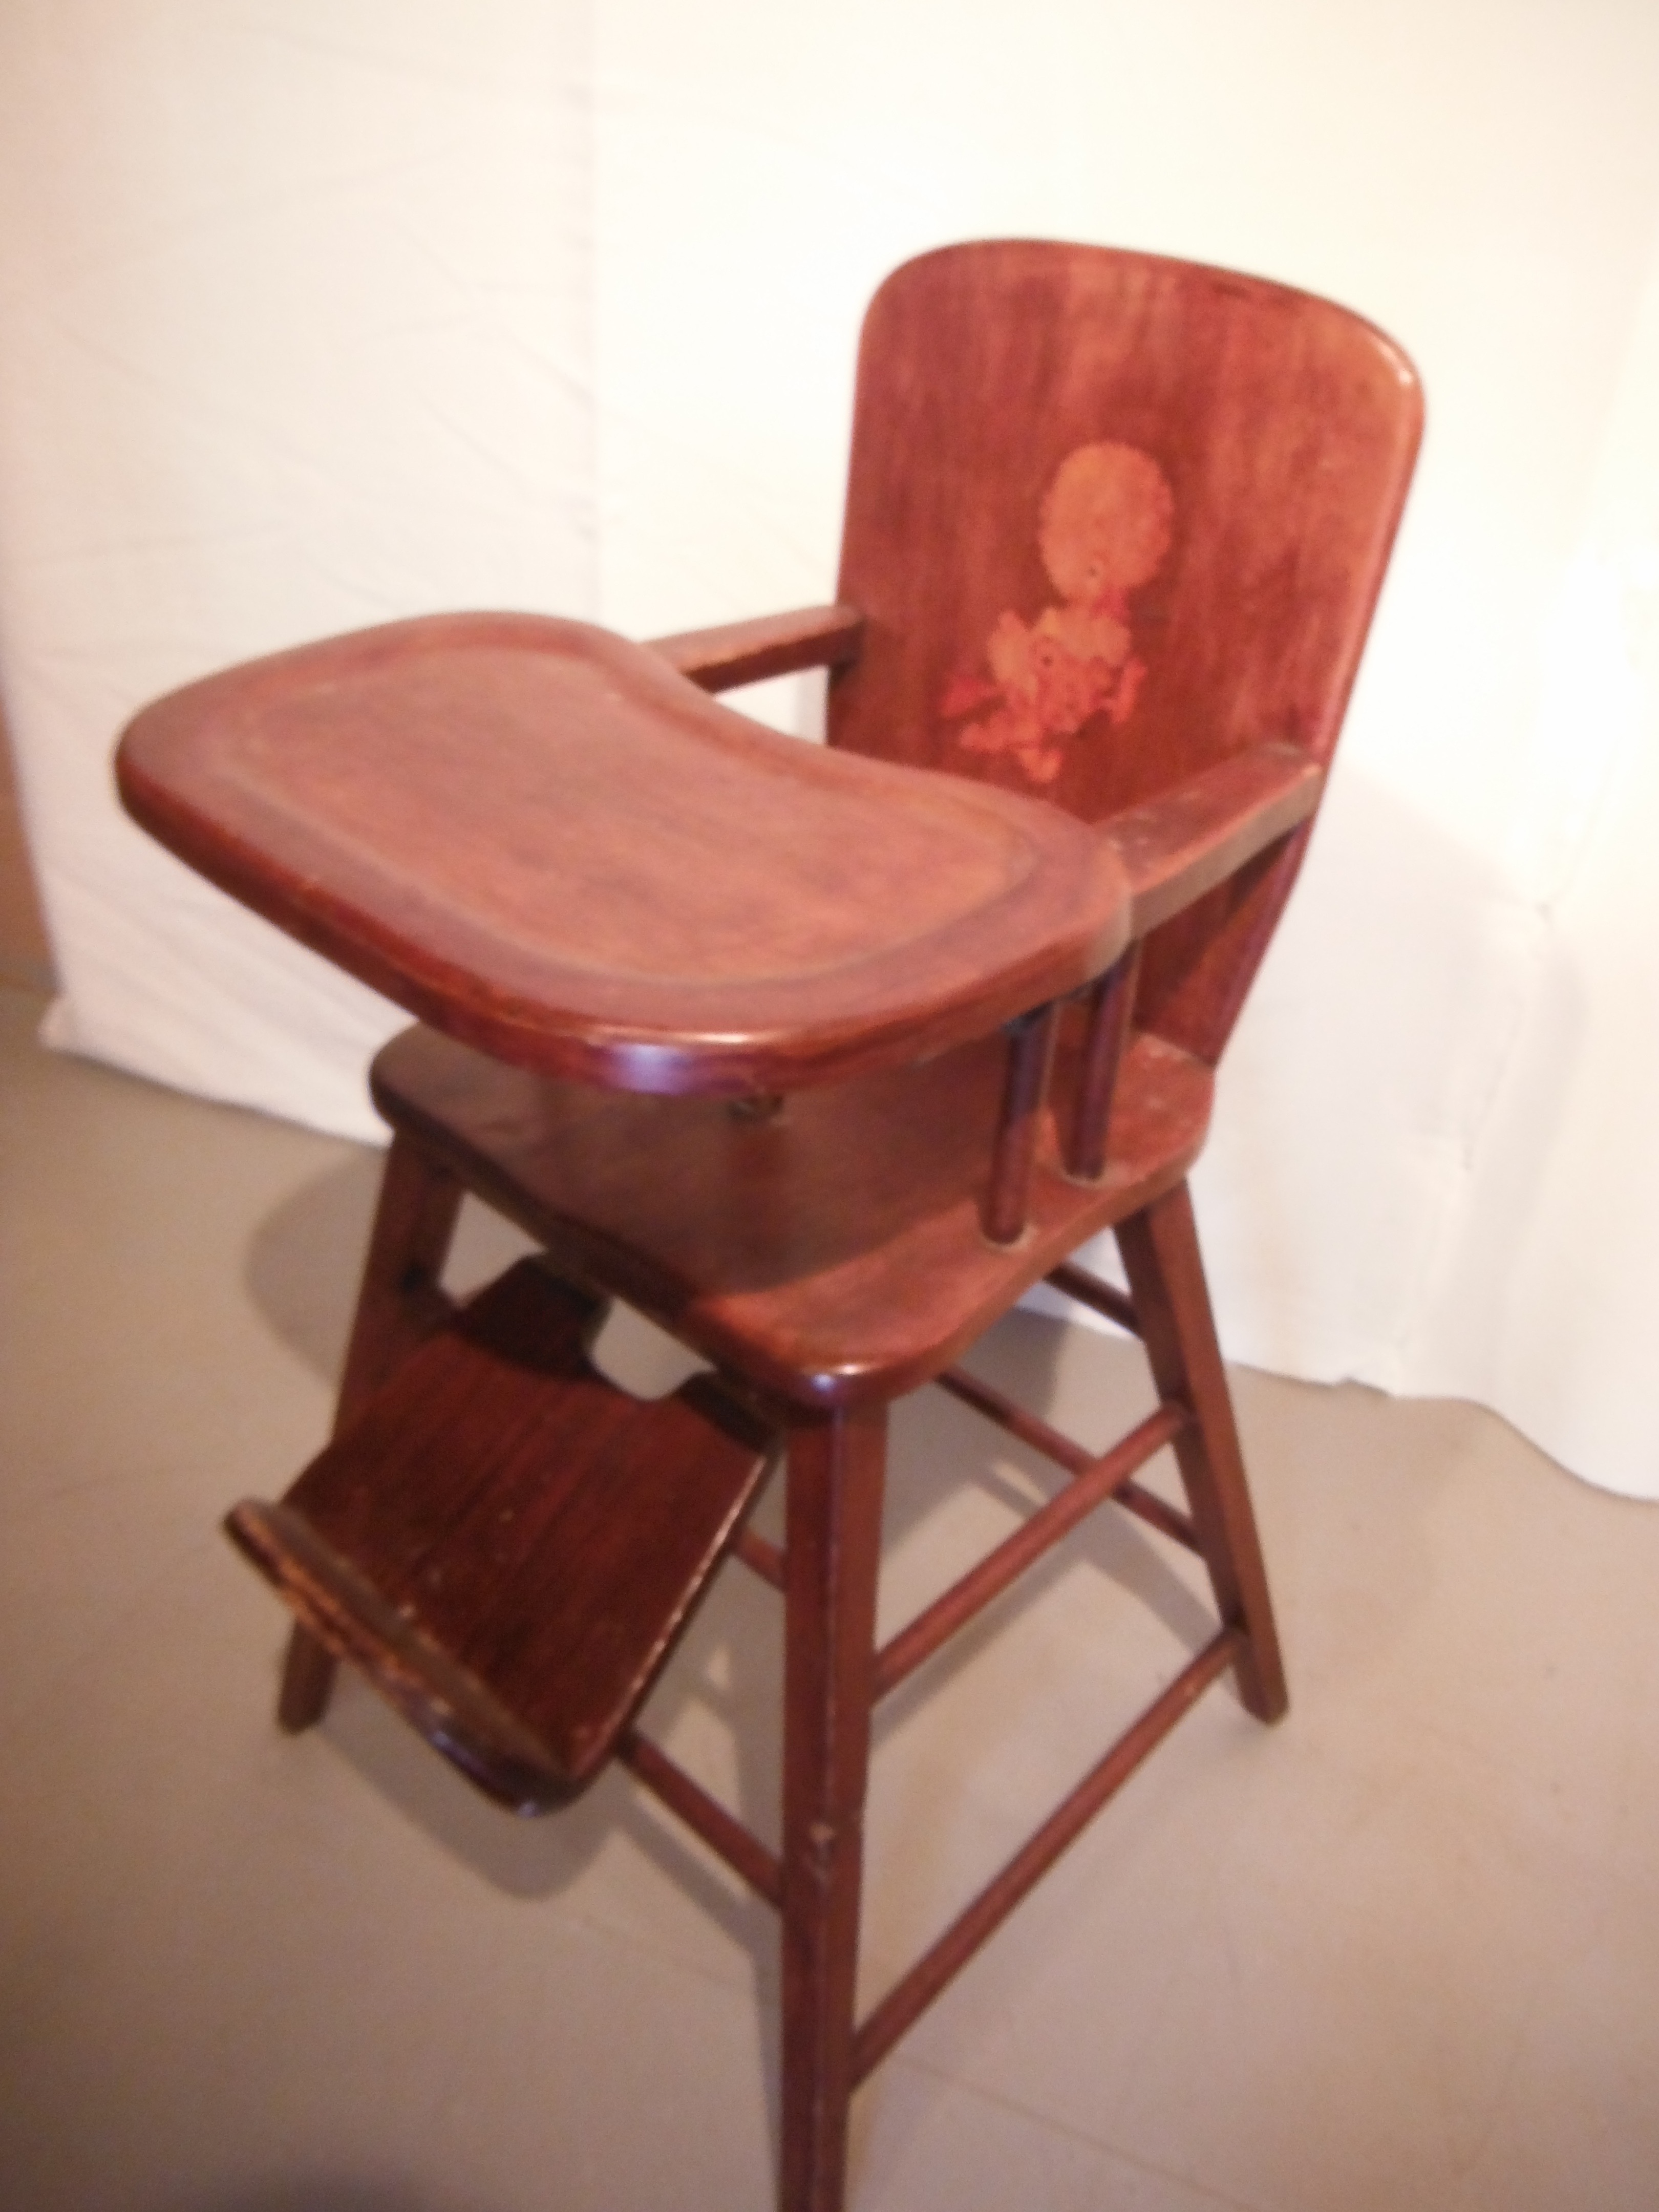 antique wooden high chair with metal tray